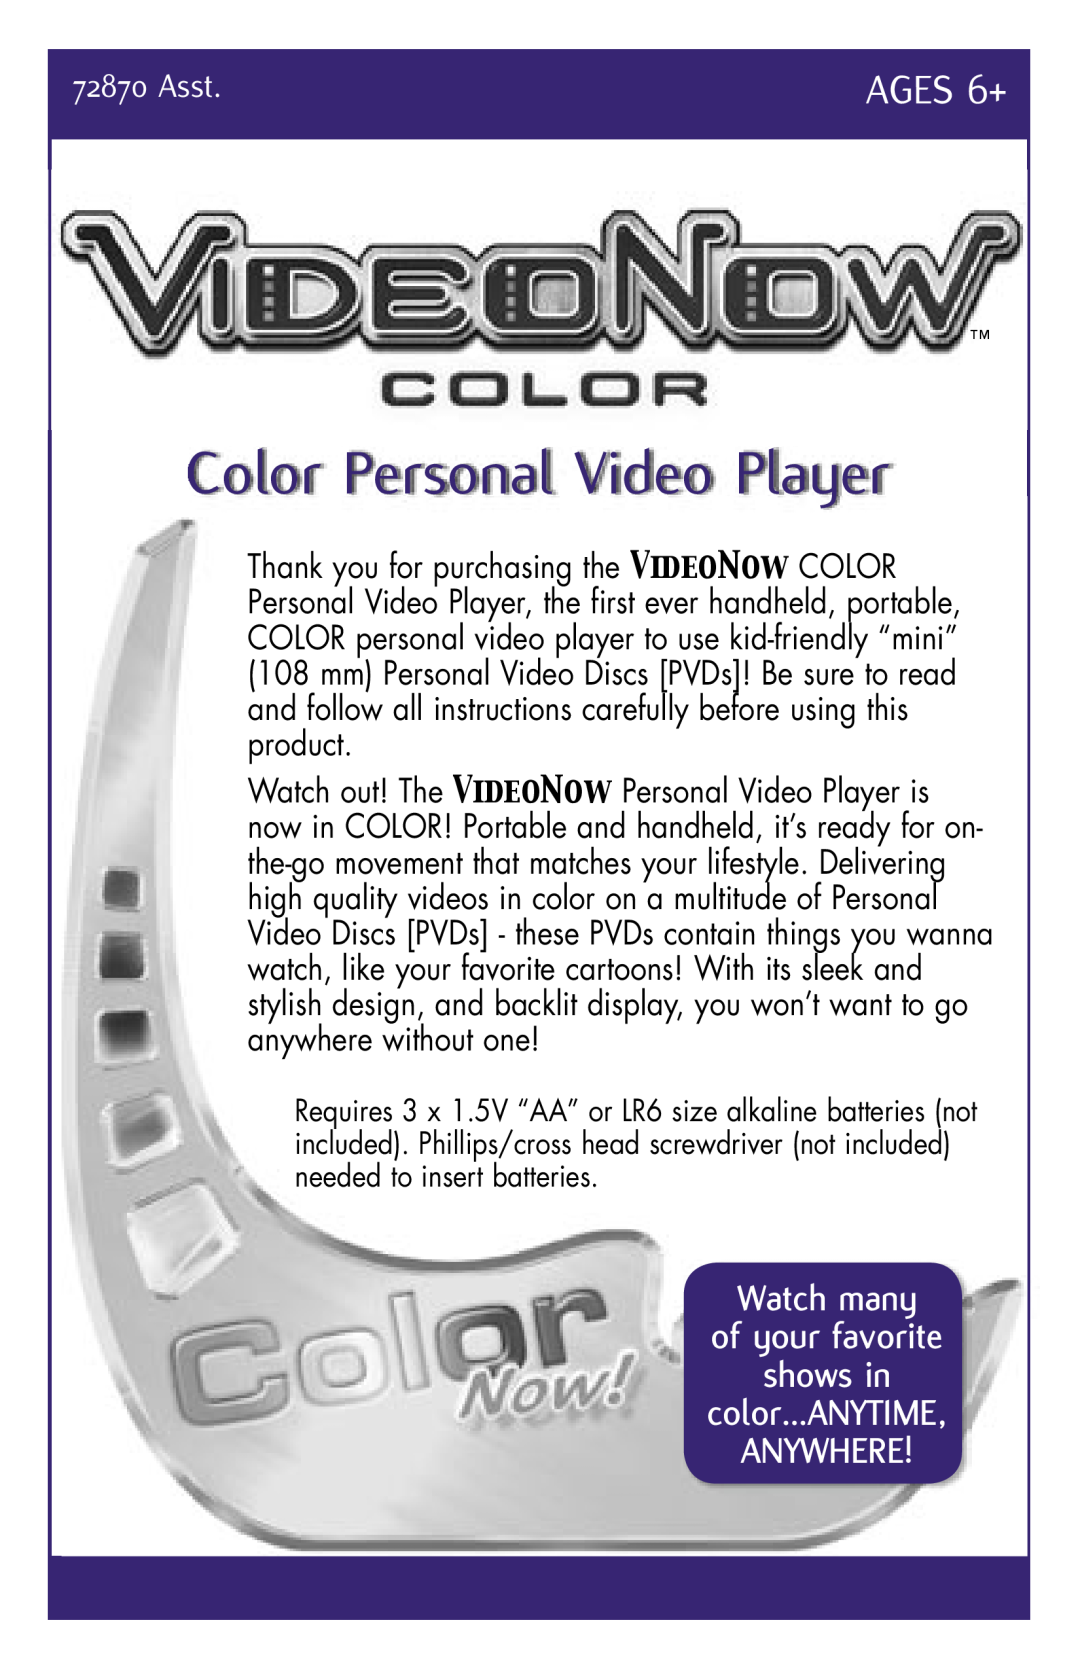 Hasbro 72870 manual Color Personal Video Player, Watch many of your favorite shows in color…ANYTIME ANYWHERE, Asst 